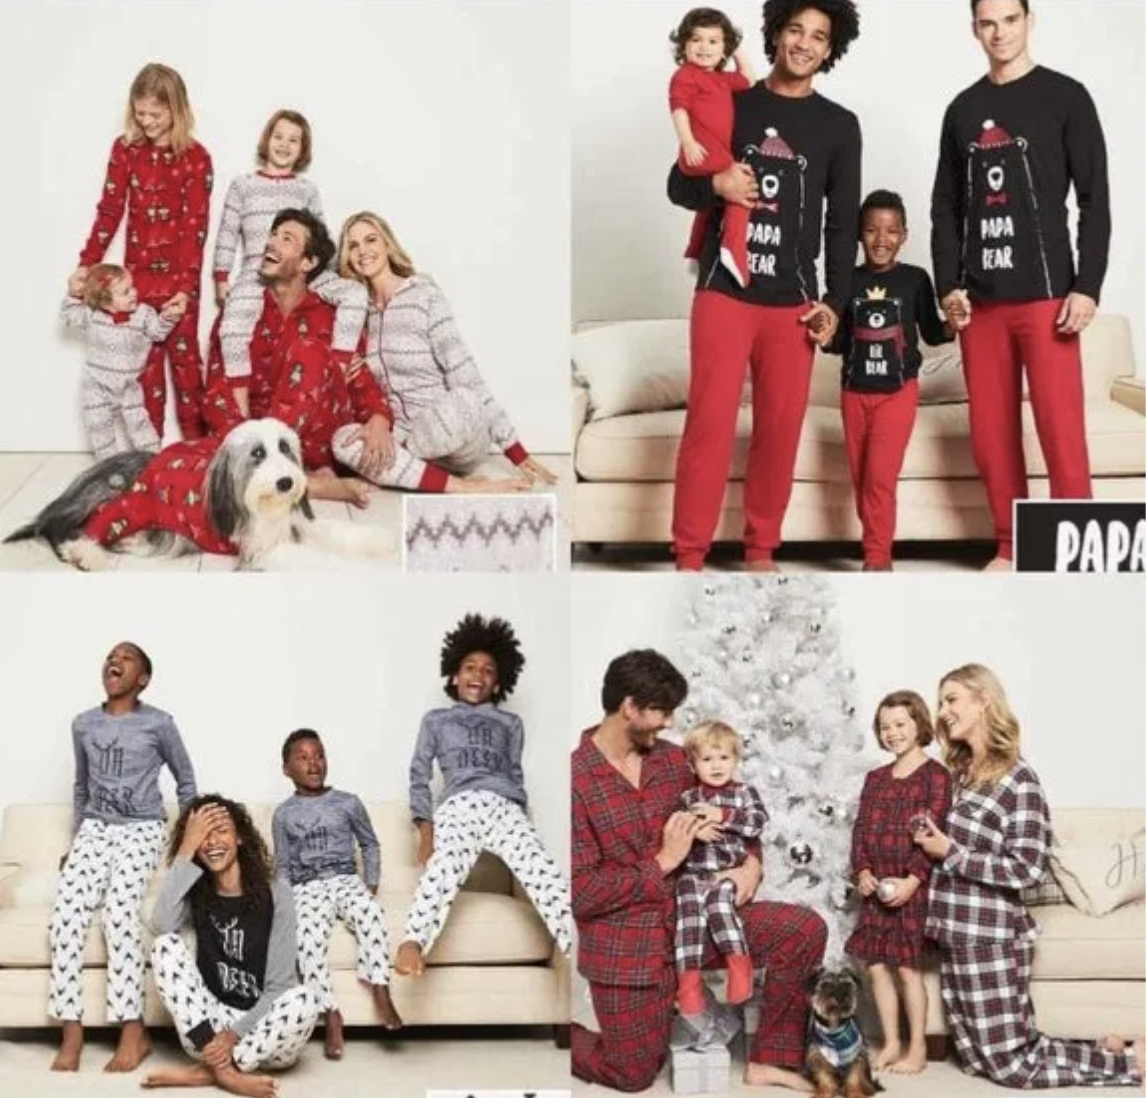 images and ads for macys and other big brands